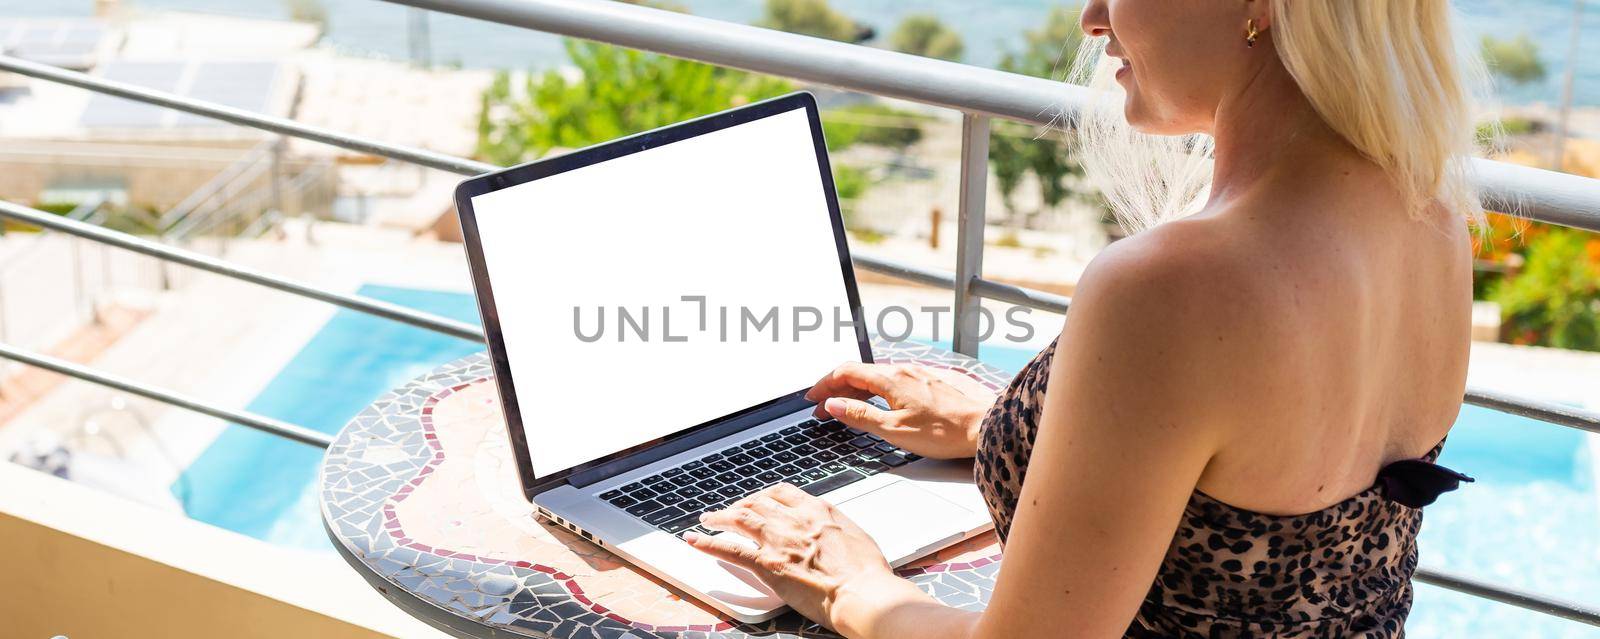 computer screen blank mockup. hand work using laptop with white background for advertising, contact business search information on desk. marketing and creative design by Andelov13